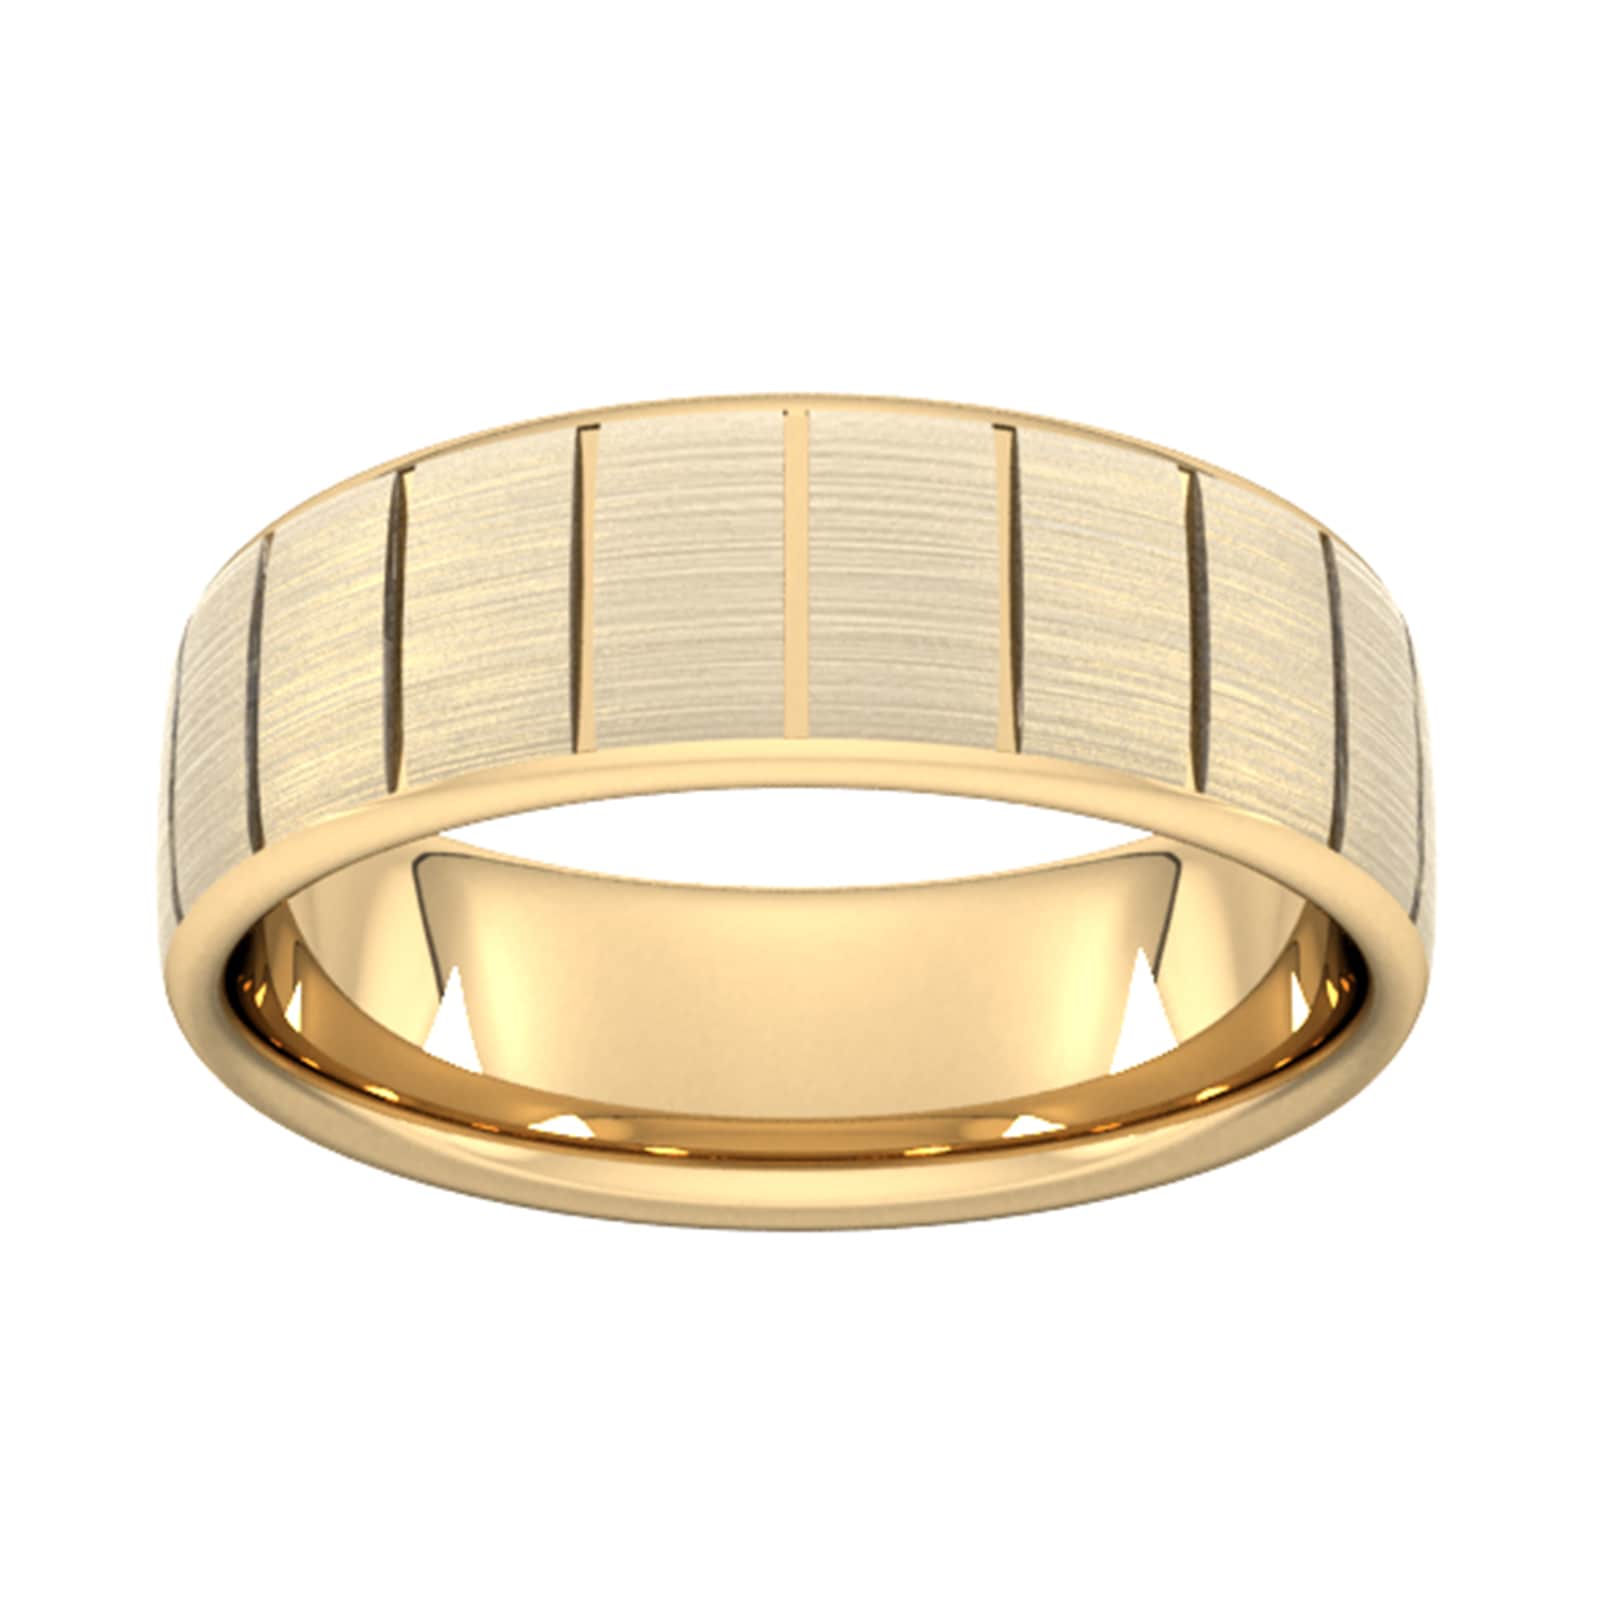 7mm D Shape Heavy Vertical Lines Wedding Ring In 9 Carat Yellow Gold - Ring Size I